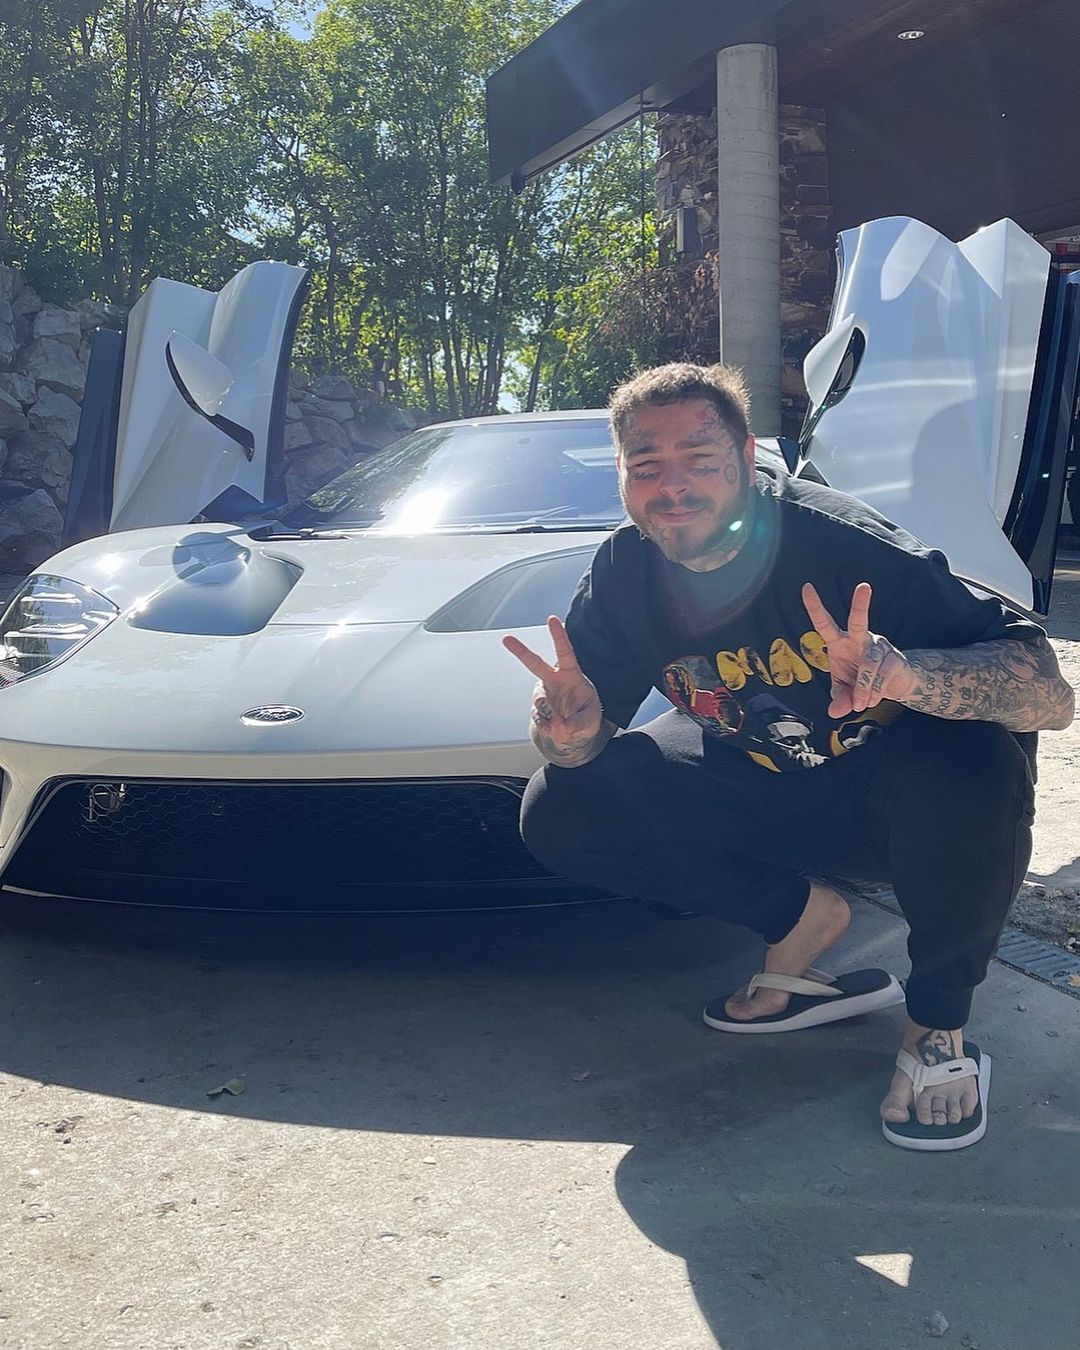 Post Malone Adds The 2021 Ford Gt To His Crazy All White Car Collection ...